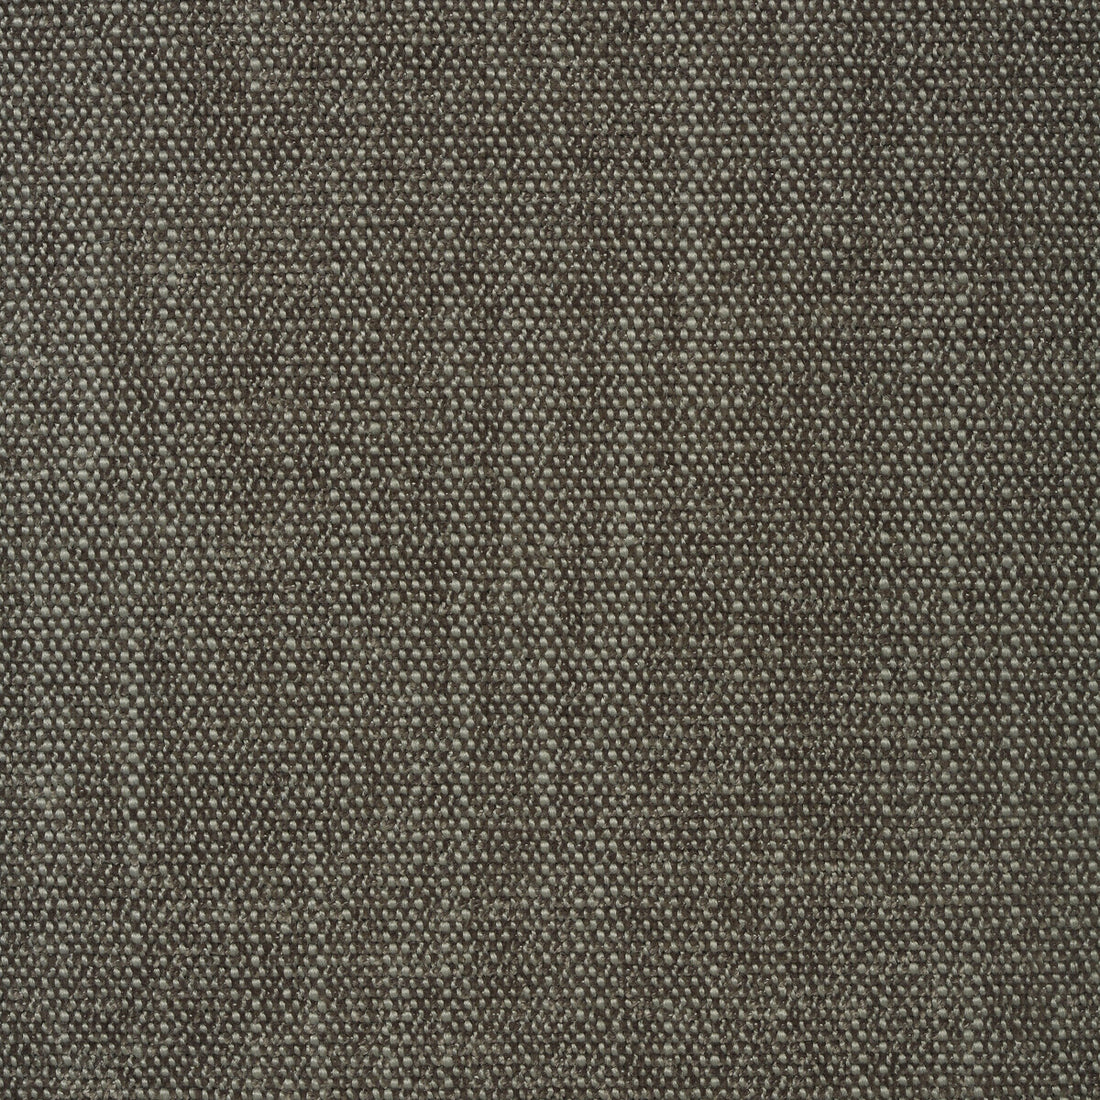 Kravet Contract fabric in 35114-21 color - pattern 35114.21.0 - by Kravet Contract in the Crypton Incase collection